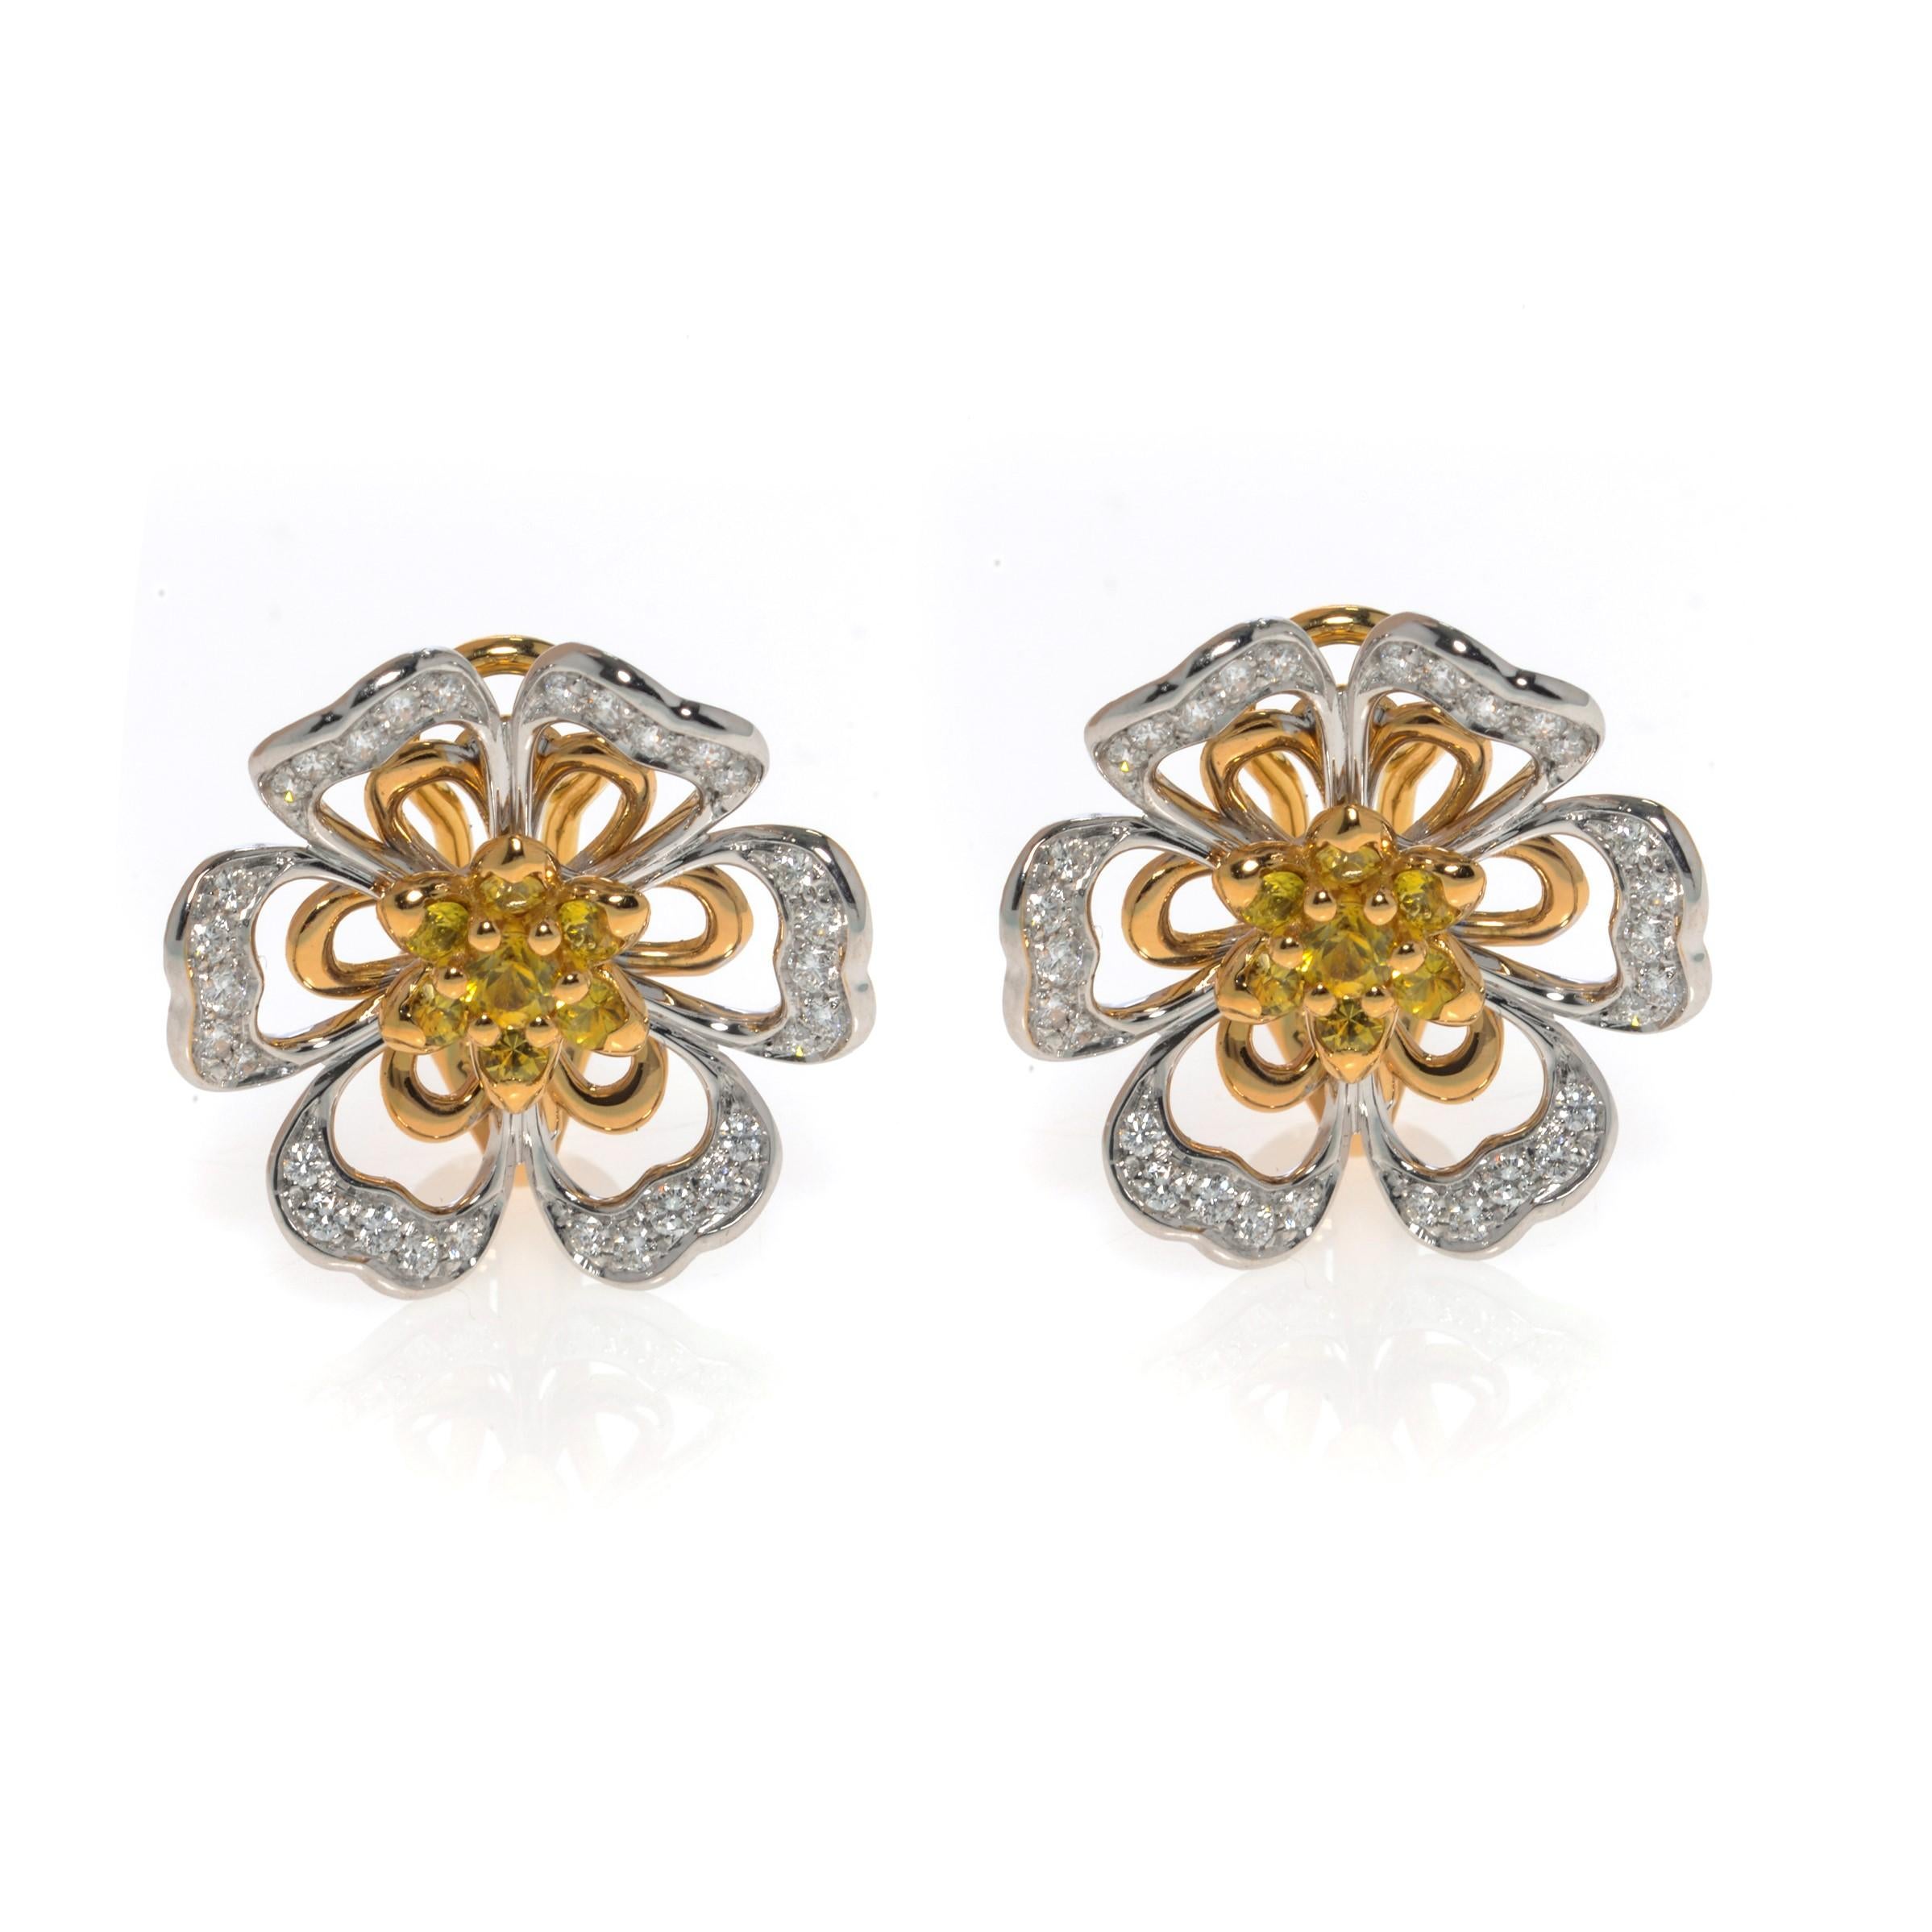 This gorgeous pair of estate earrings is finely crafted in solid 18K rose and white gold, made in the shape of beautiful flowers. Set with yellow natural Sapphires and brilliant cut diamonds. The total diamond weight for the pair is 0.70 carats of